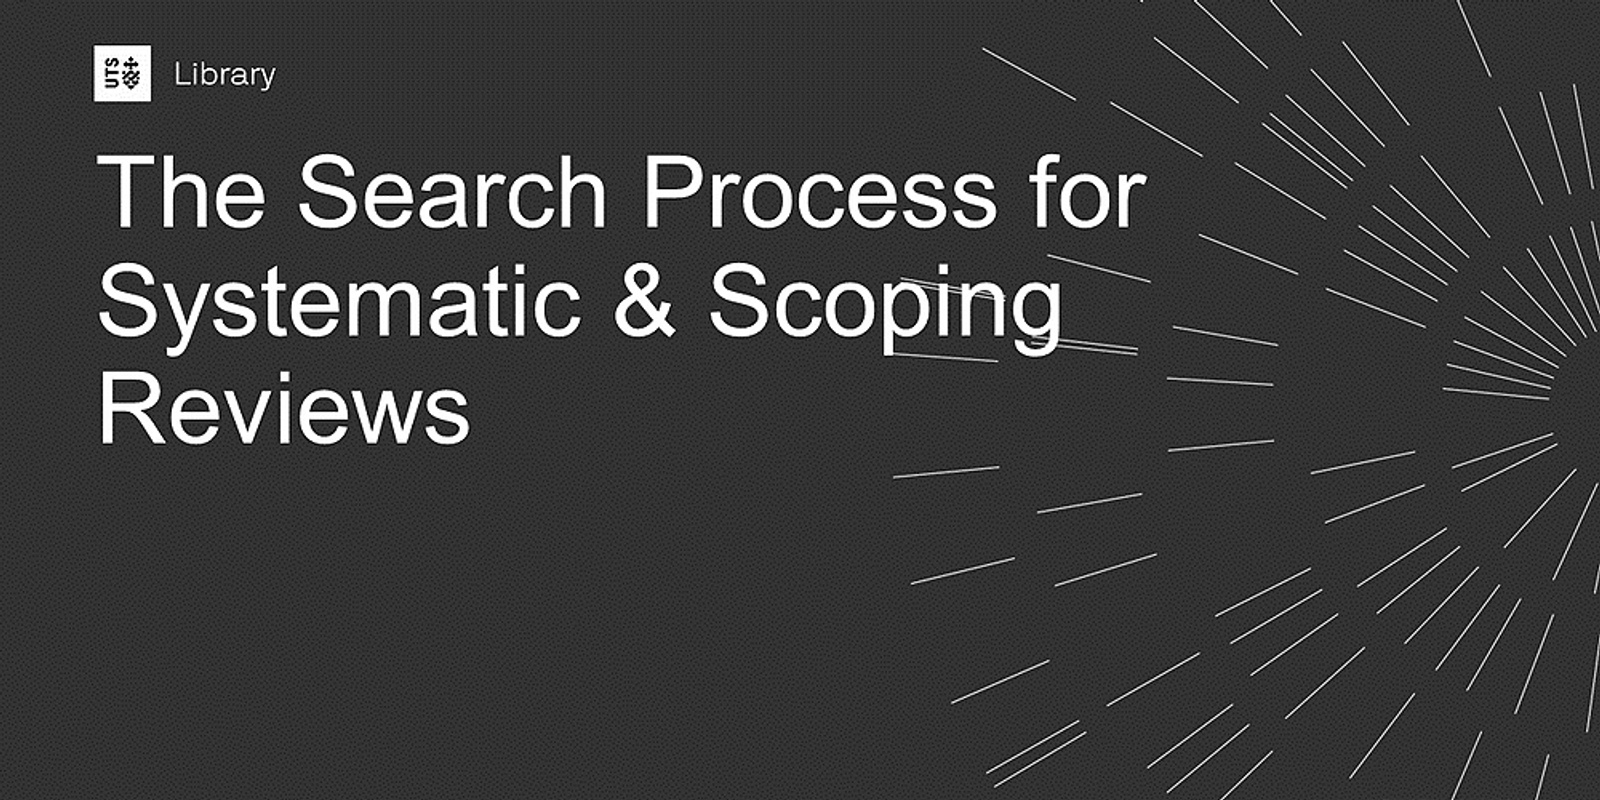 Banner image for The Search Process for Systematic & Scoping Reviews (hybrid mode)